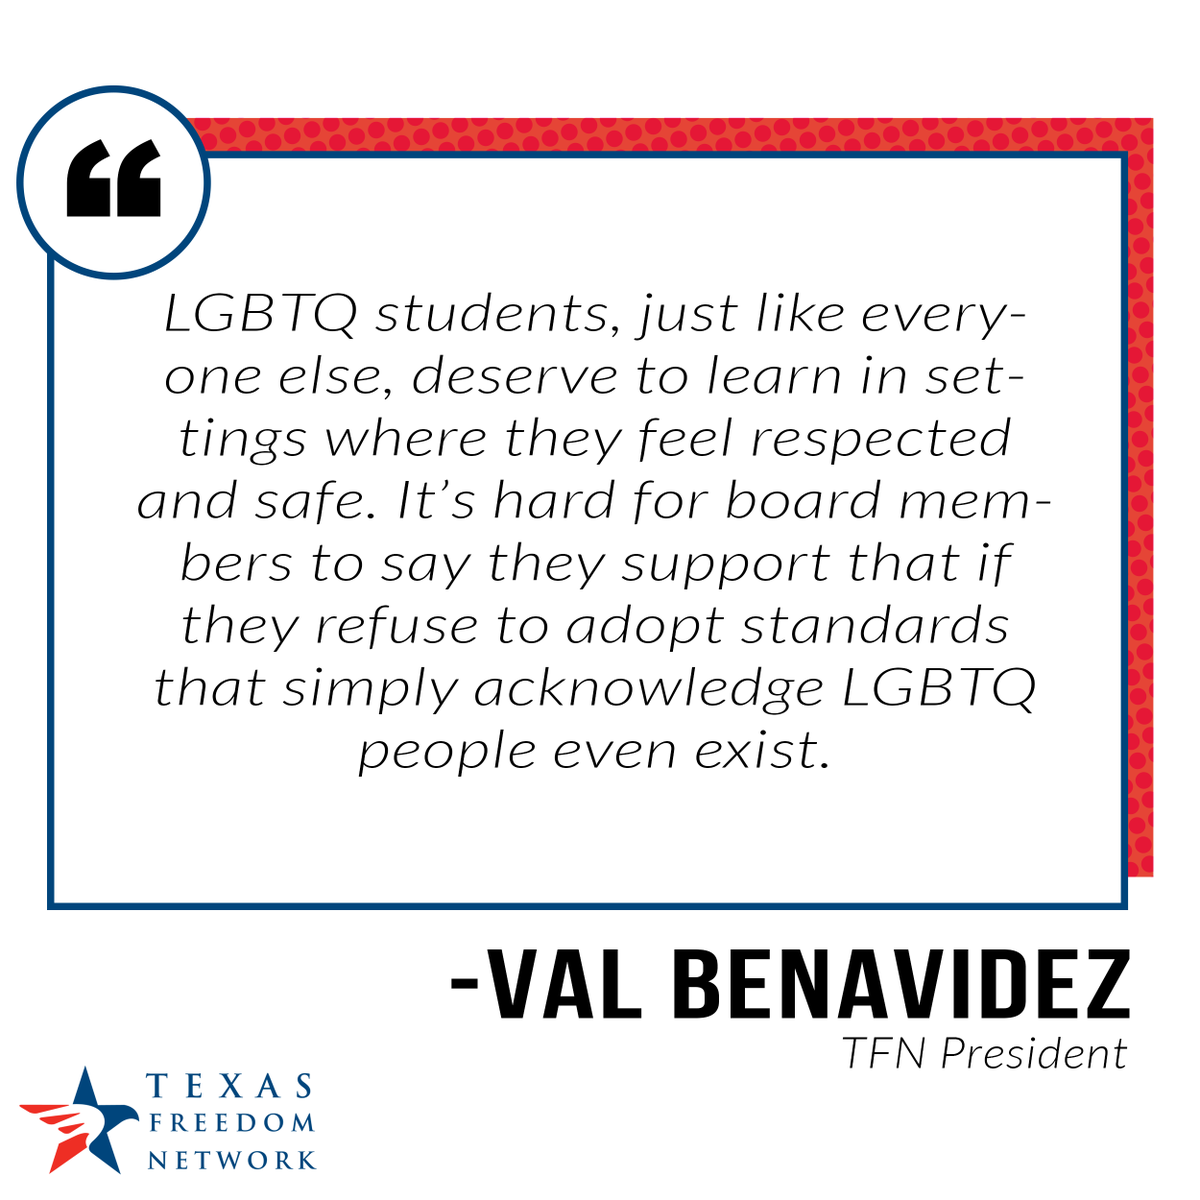 The SBOE did make some improvements, like including info on contraception. But, in a tragic failure, the board refused to even acknowledge the existence of LGBTQ people in the standards.  #TeachTheTruth